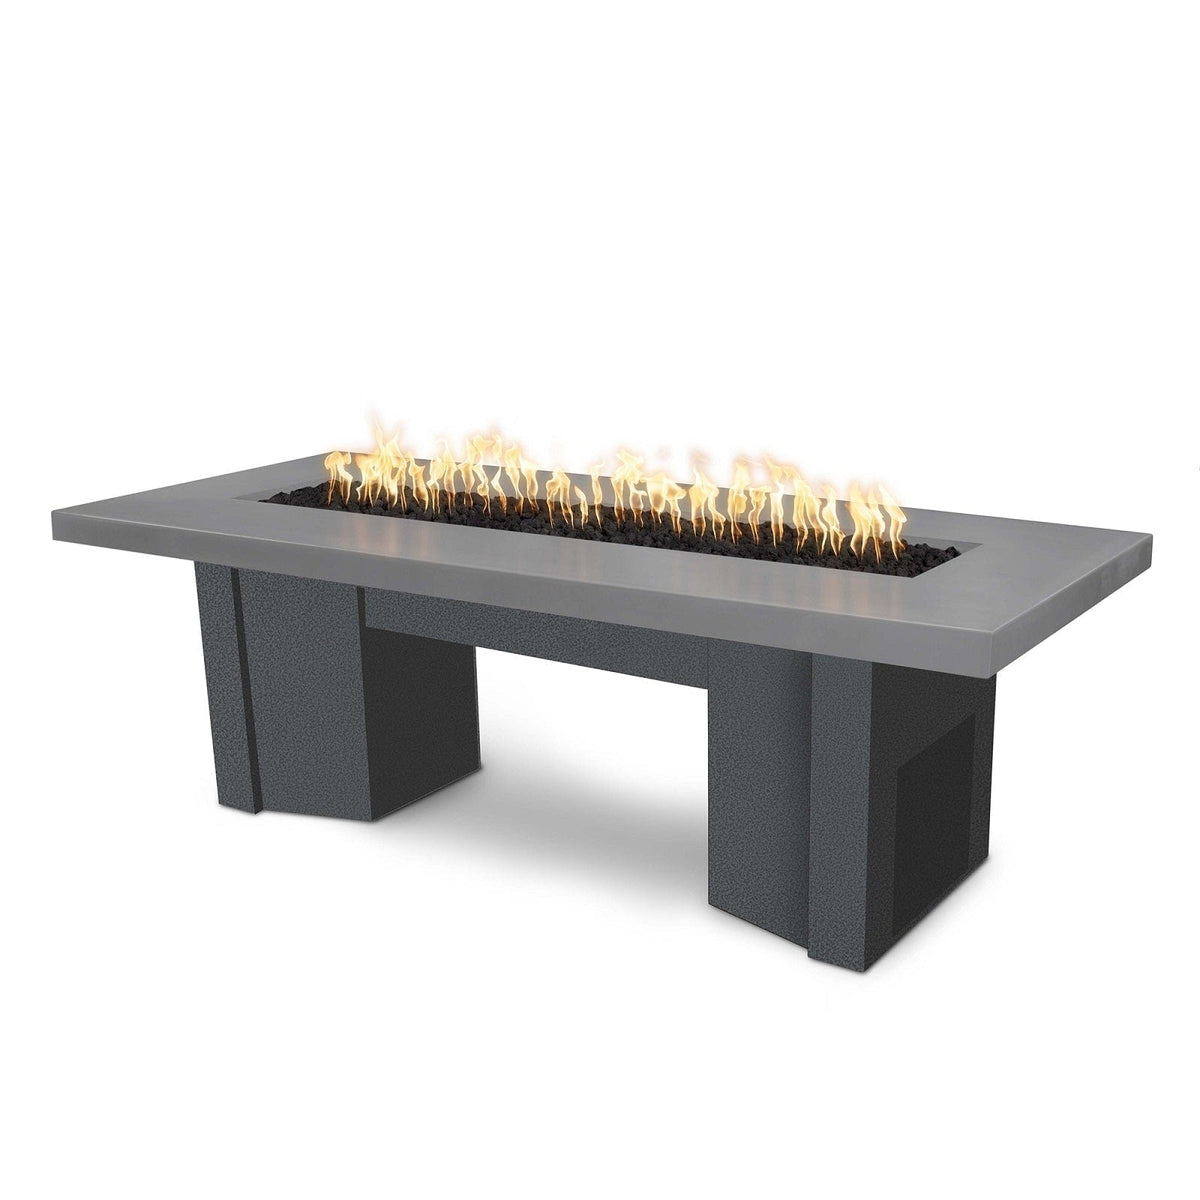 The Outdoor Plus Fire Features Natural Gray (-NGY) / Silver Vein Powder Coated Steel (-SLV) The Outdoor Plus 78&quot; Alameda Fire Table Smooth Concrete in Liquid Propane - 12V Electronic Ignition / OPT-ALMGFRC78E12V-LP